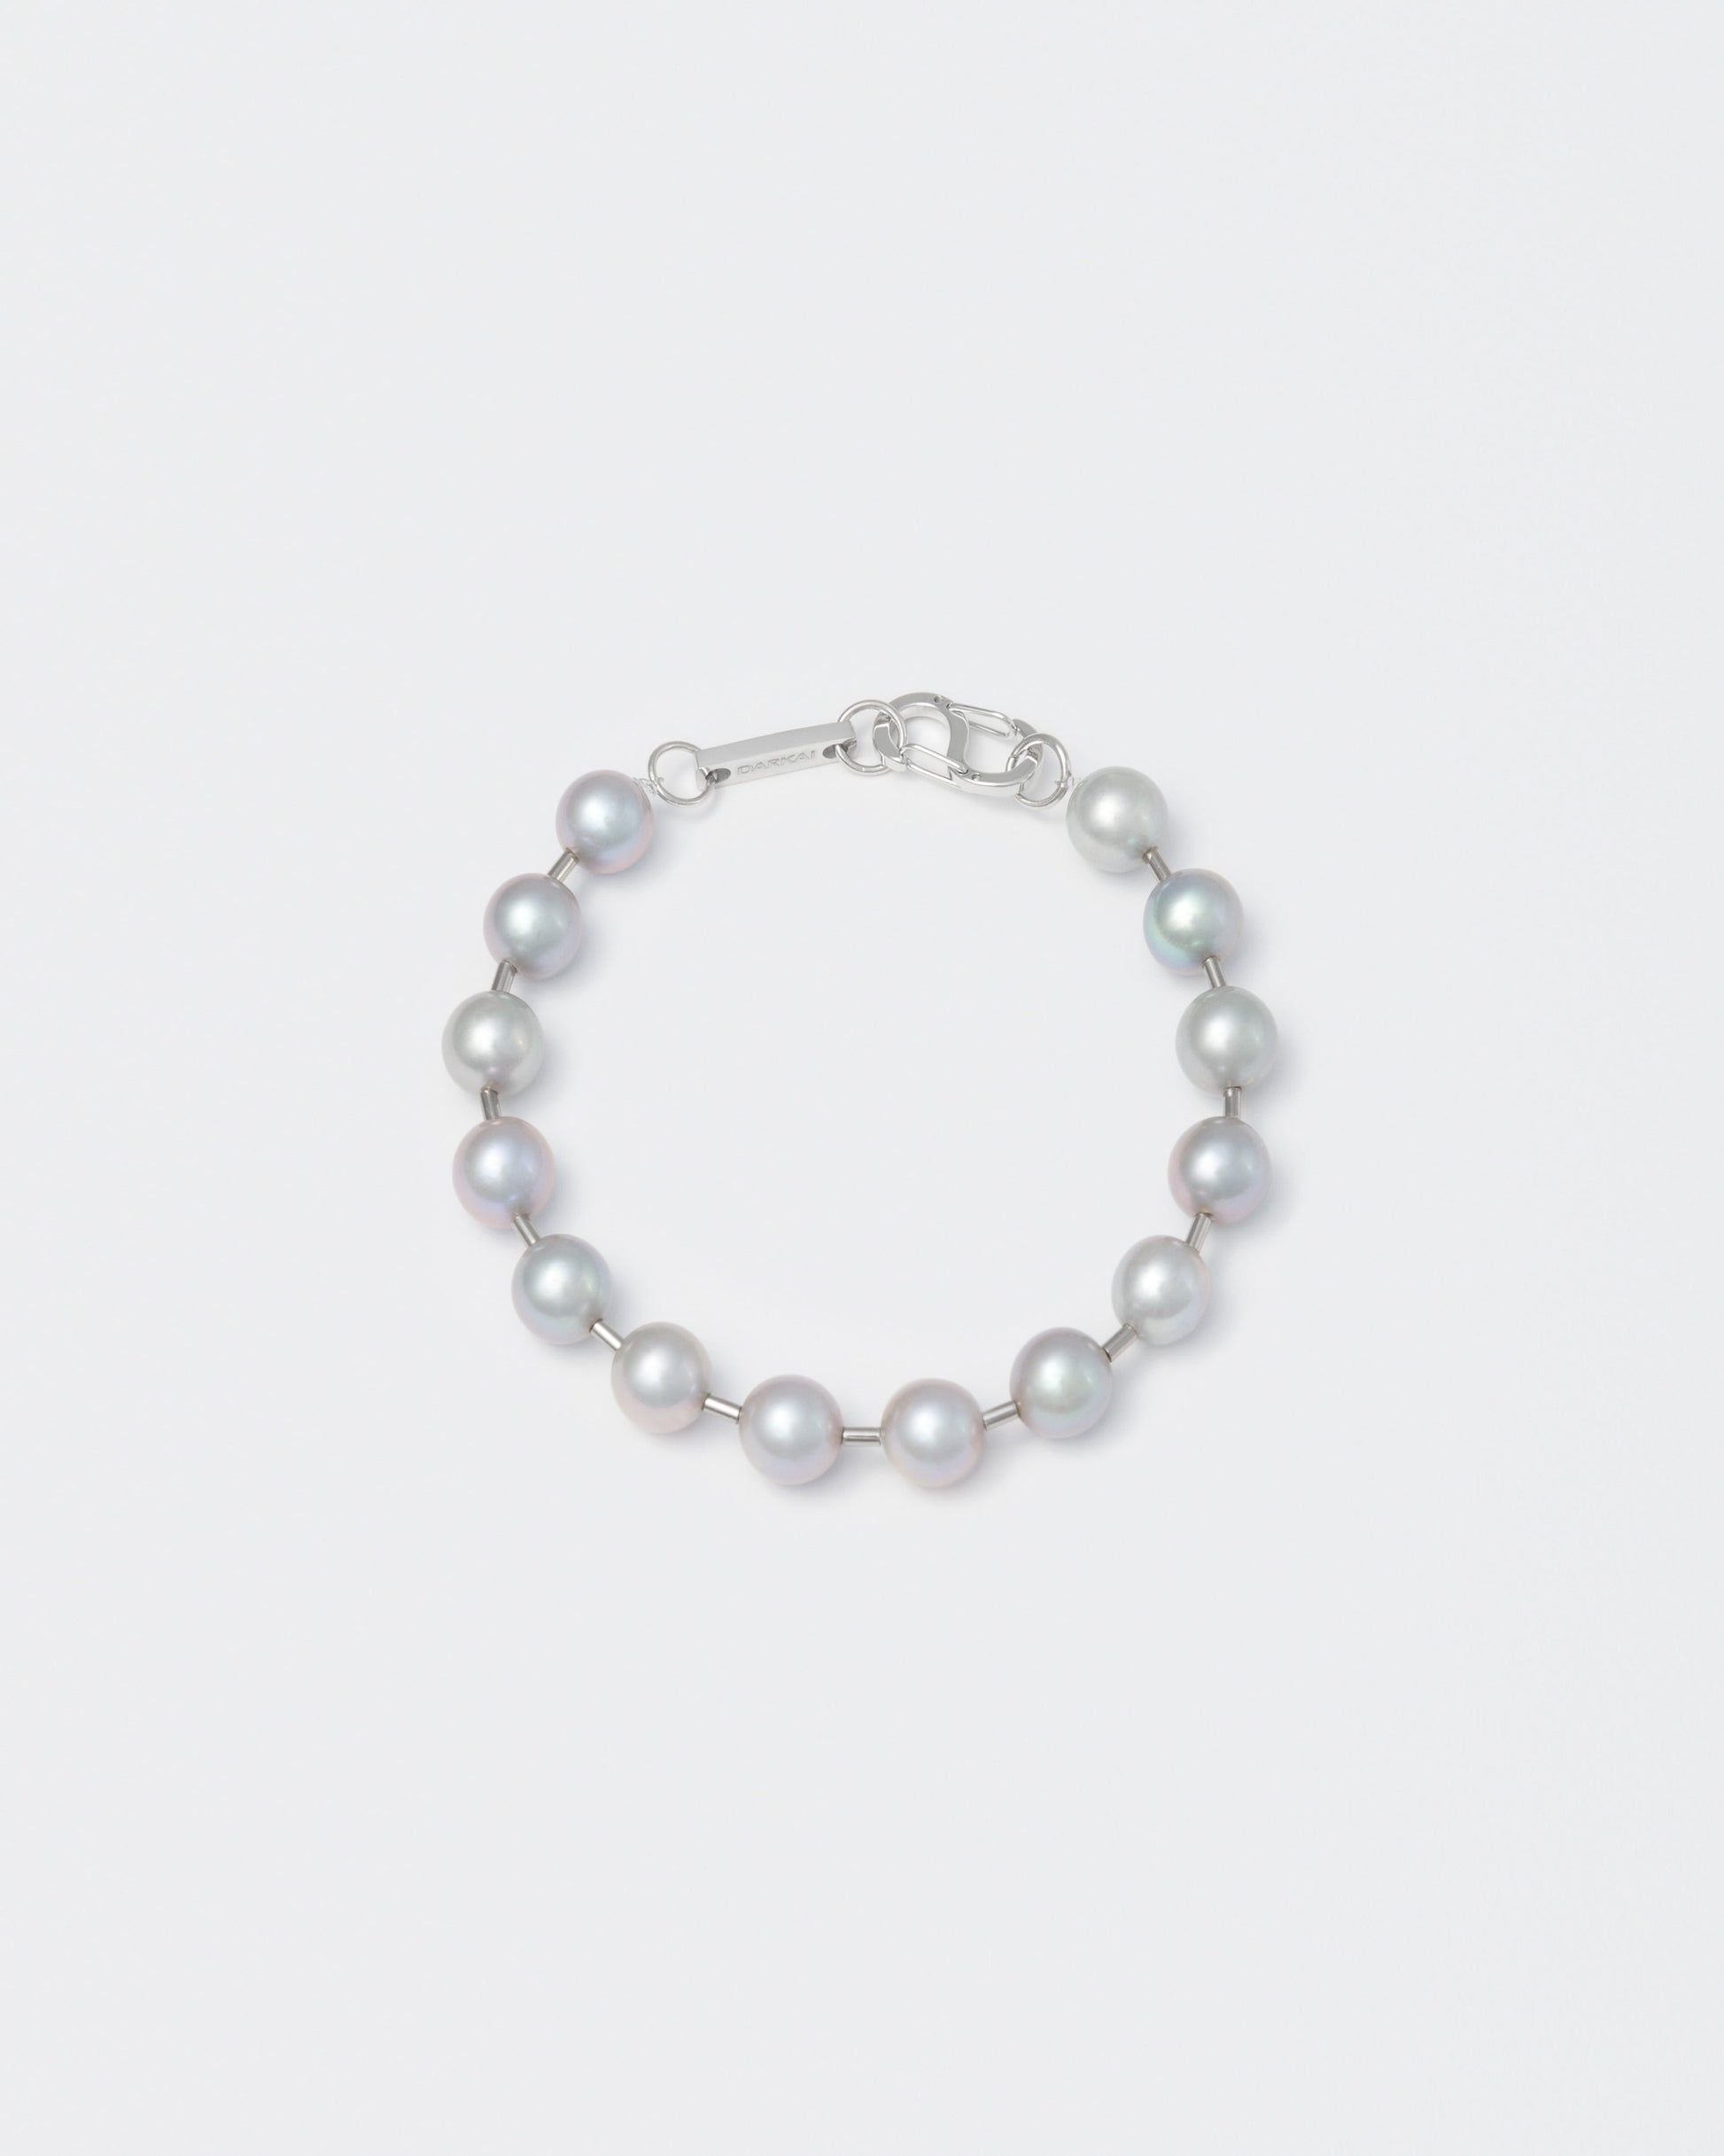 Natural Indonesian freshwater pearls bracelet with ematite spacers and 18k white gold coated carabiner clasp with logo. 9mm natural freshwater pearls in silver grey.